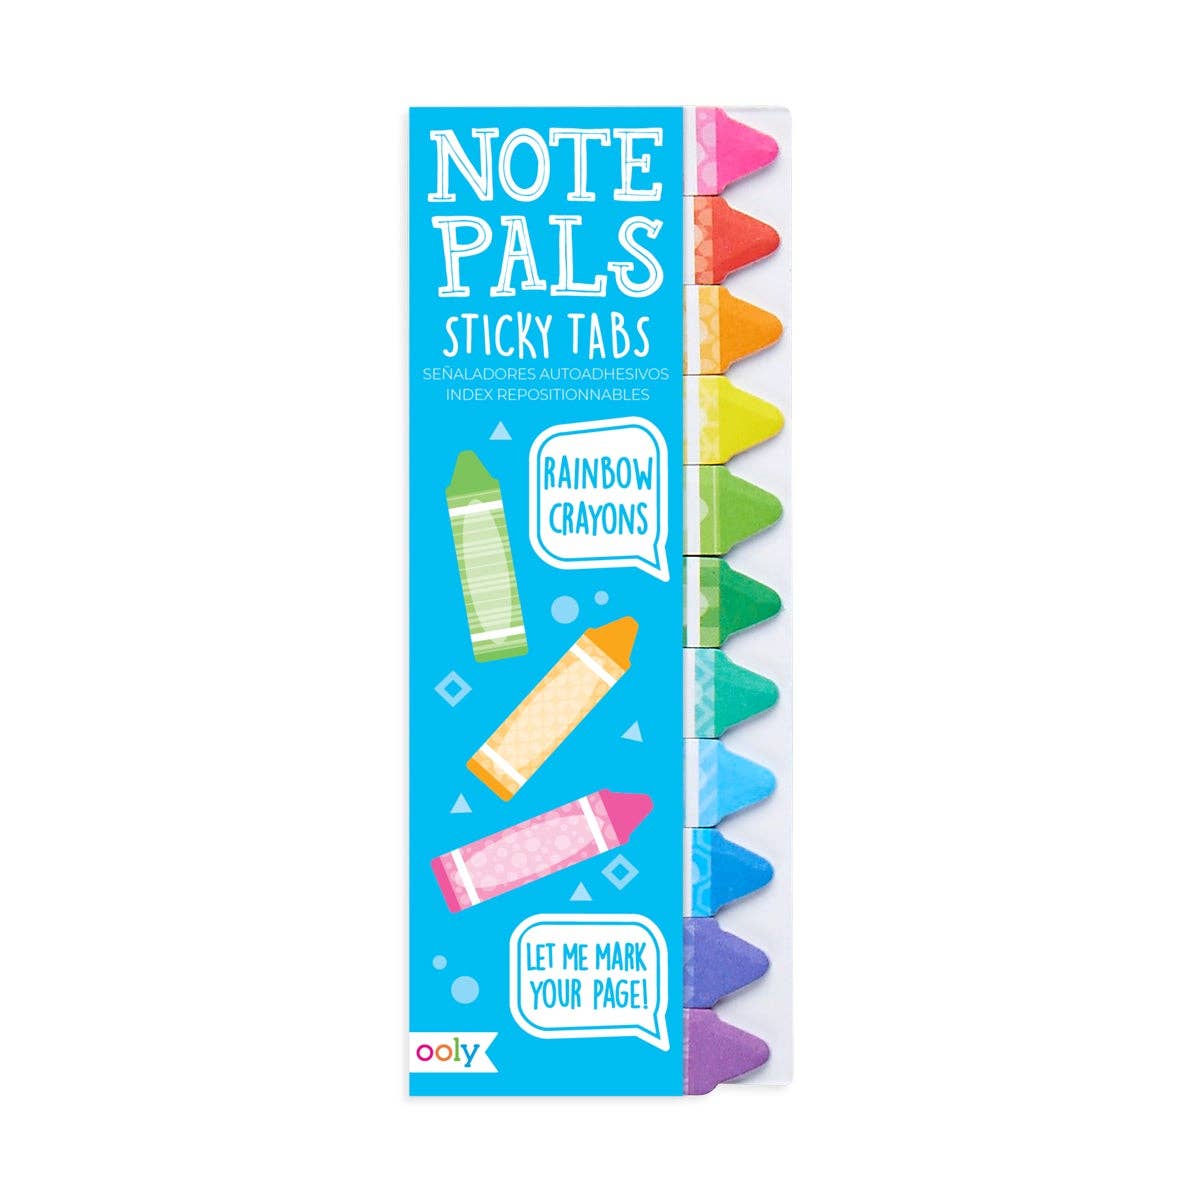 Ooly Sticky Note Tabs; Note Pals